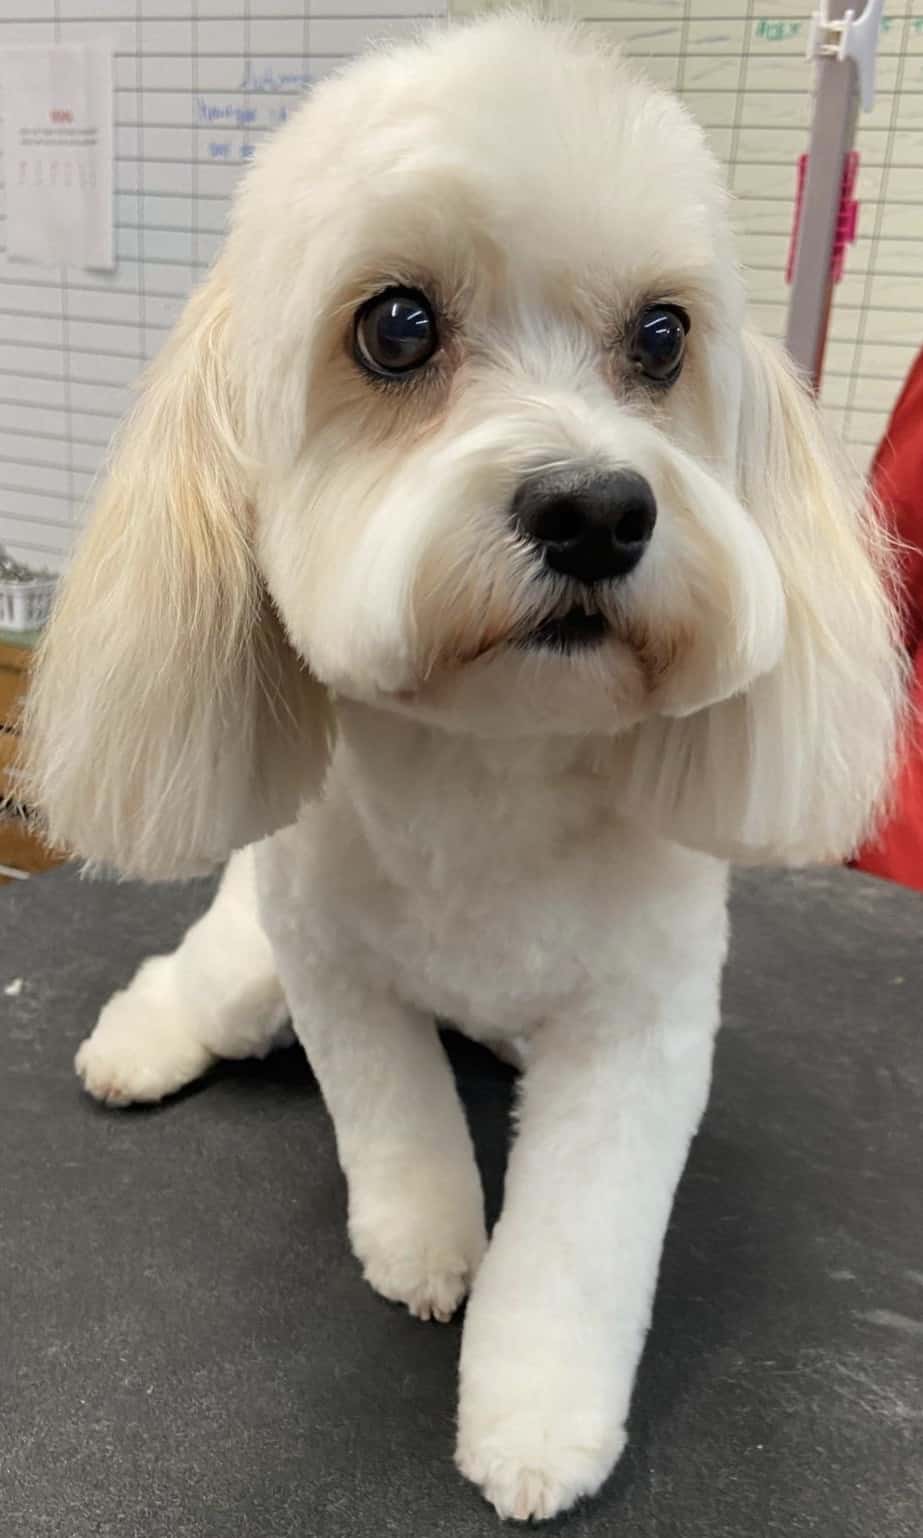 Havanese-Cavalier Mix - #1 Puppy Cut, Bear Head, Trim Ears Angled and Tail, Shellout | The House Pet Salon